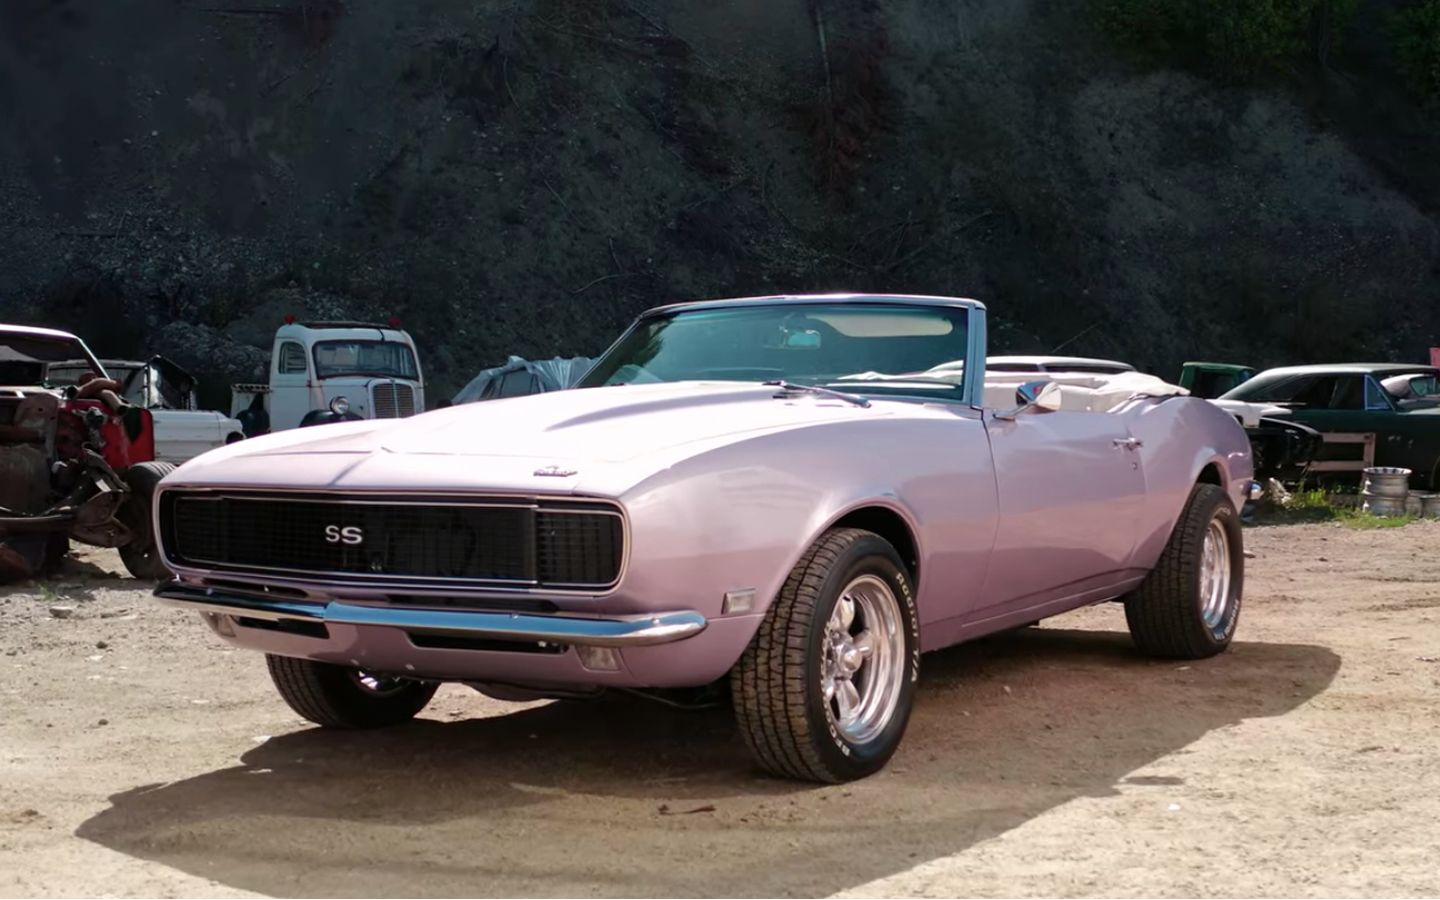 The 1968 Chevrolet Camaro Convertible was sold on Rust Valley Restorers for $68,000.